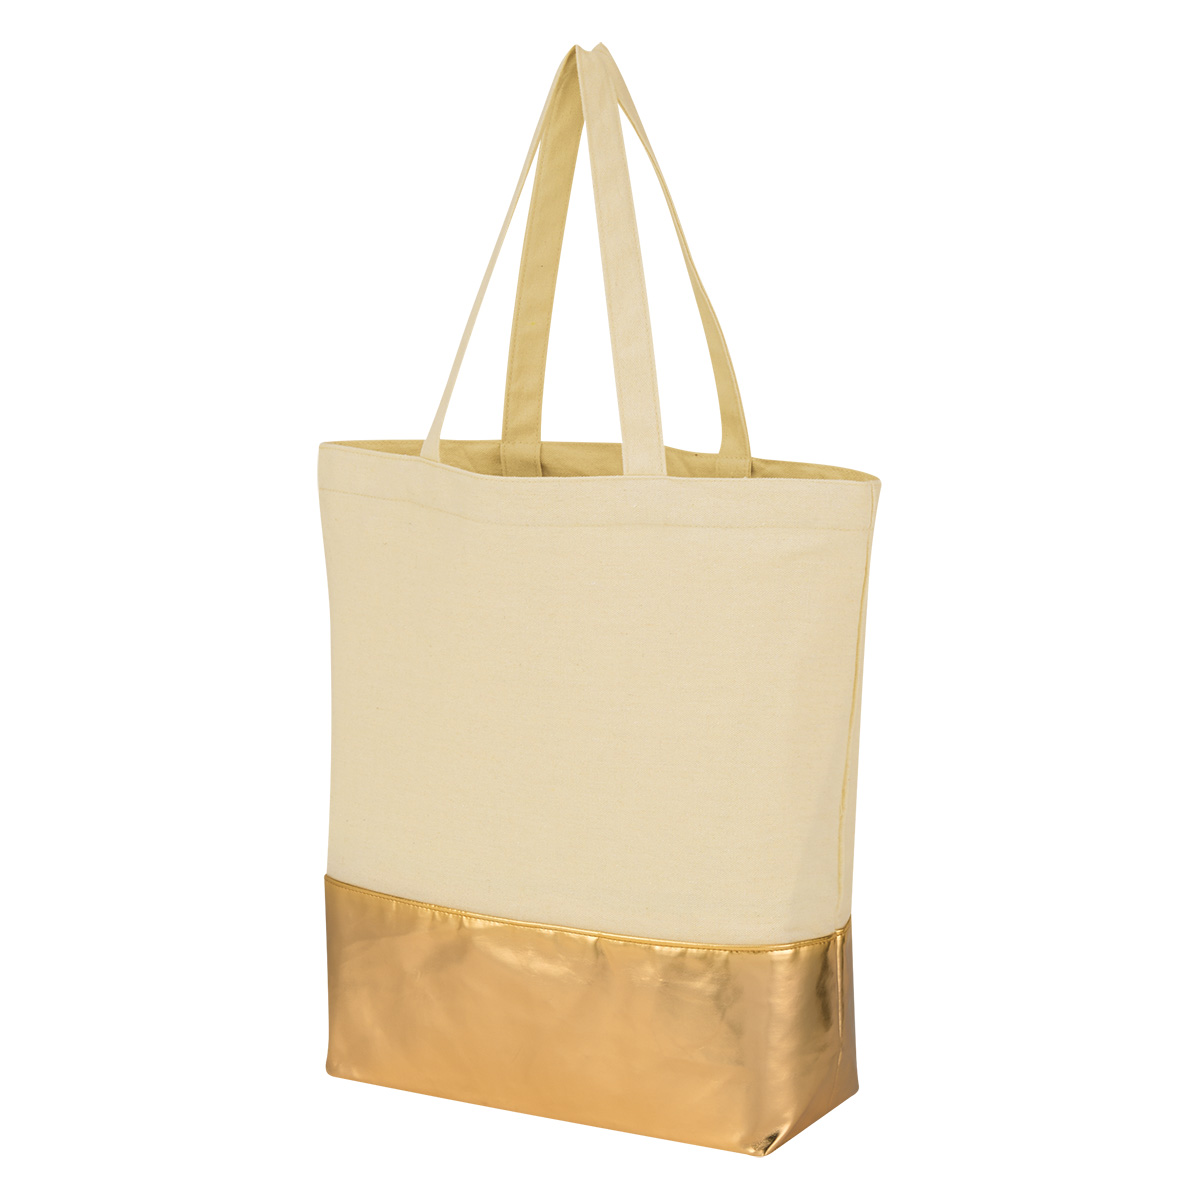 12 Oz. Cotton Tote Bag With Metallic Accent 3248 - Model Image